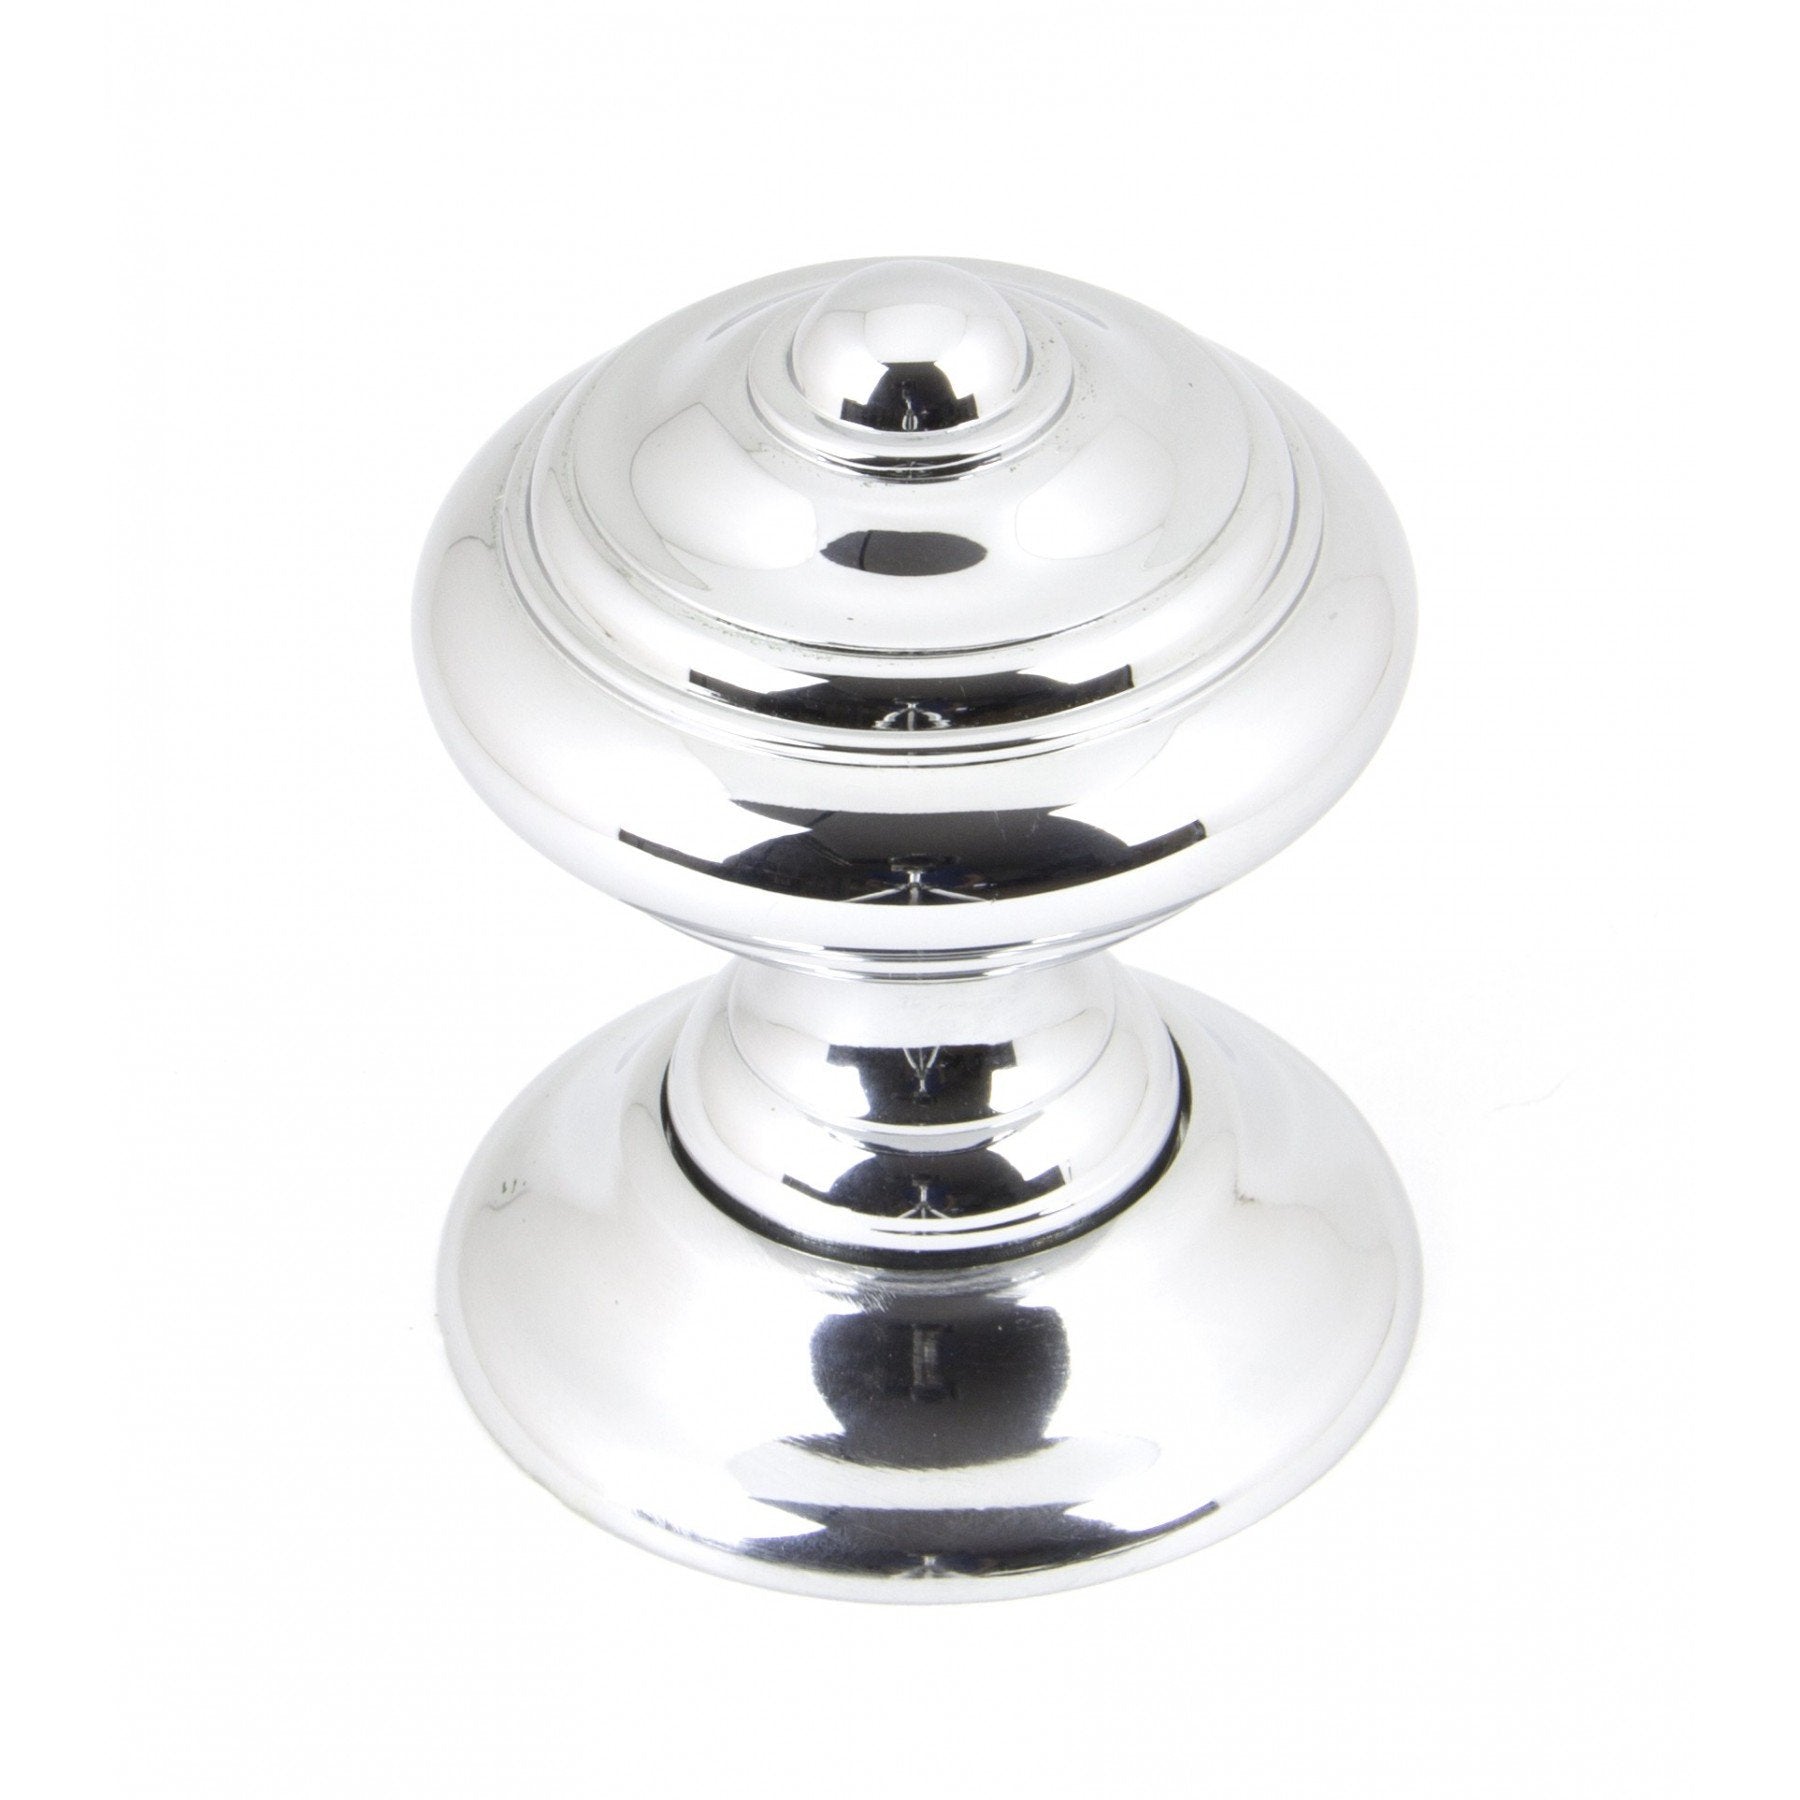 From the Anvil Polished Chrome Elmore Concealed Mortice Knob Set